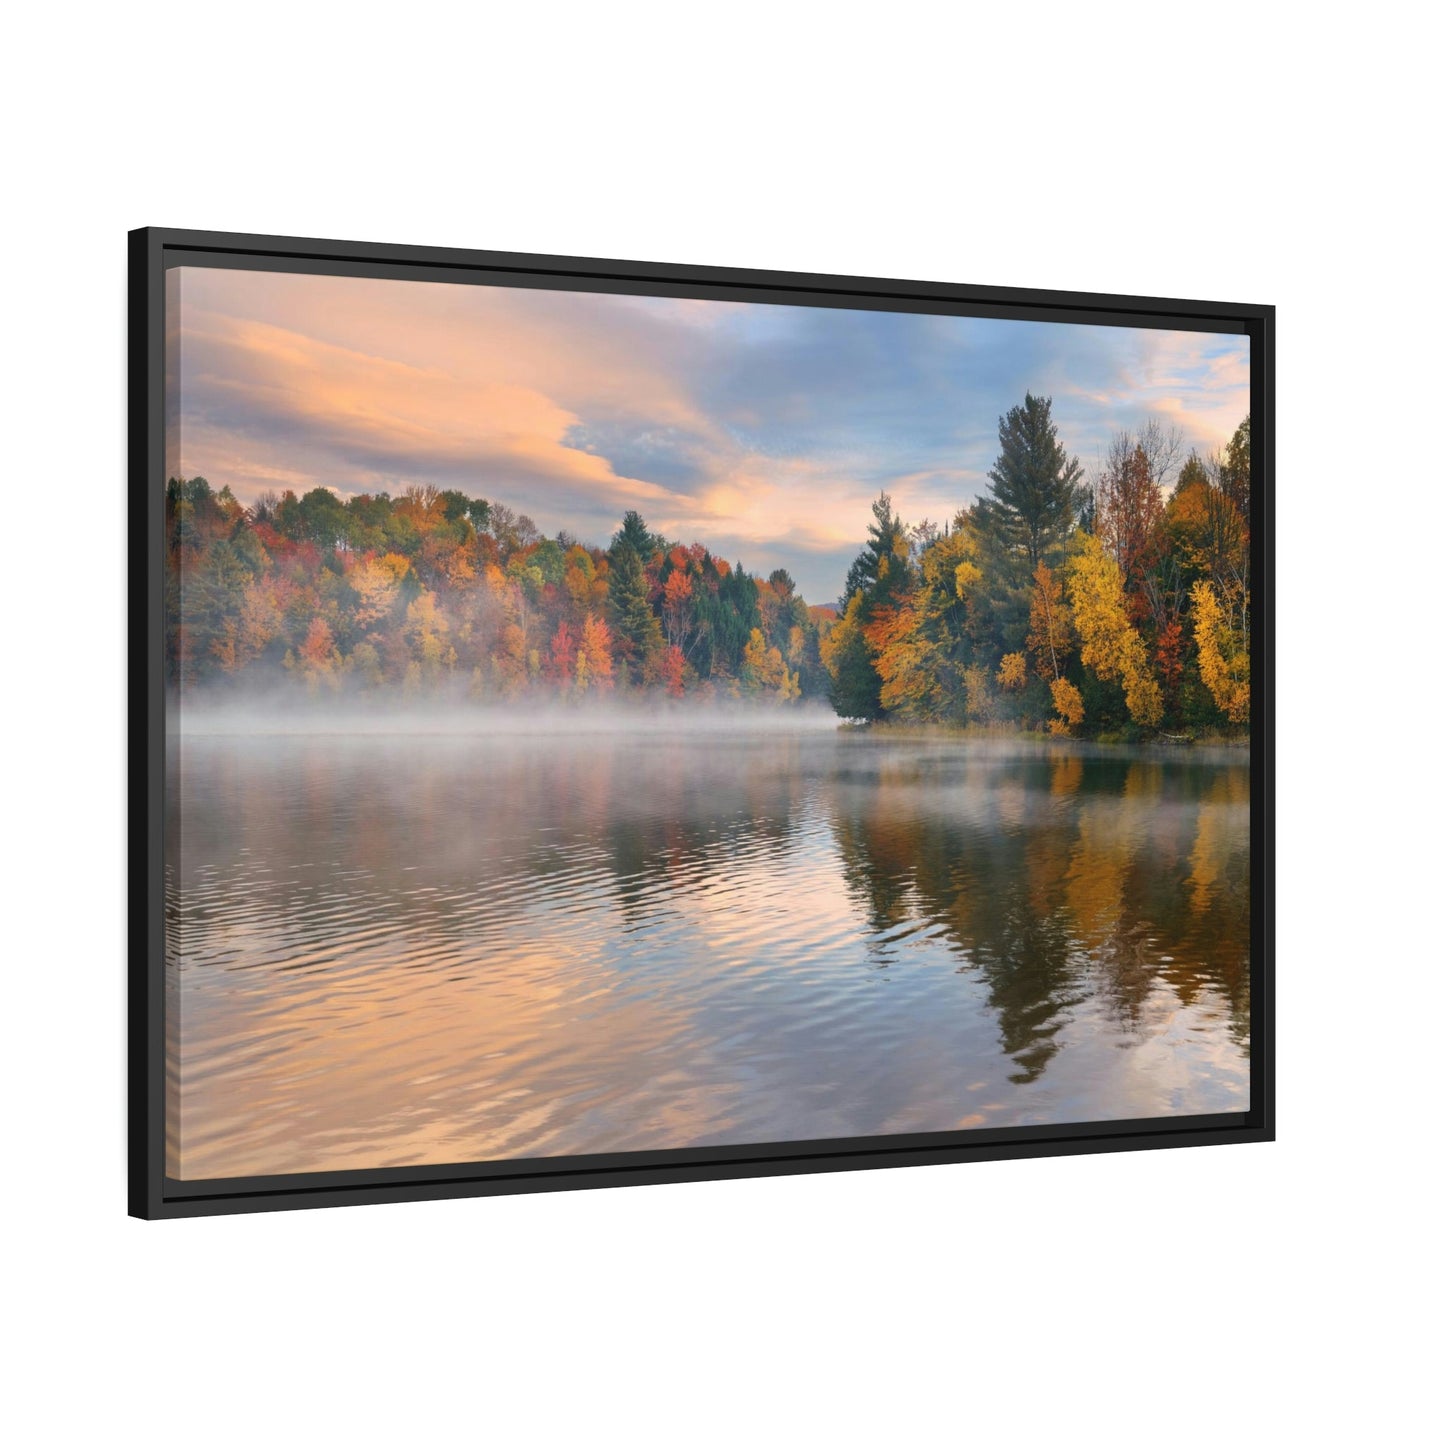 Seasonal Splendor: A Stunning Print on Canvas and Framed Canvas to Celebrate the Colors of Fall